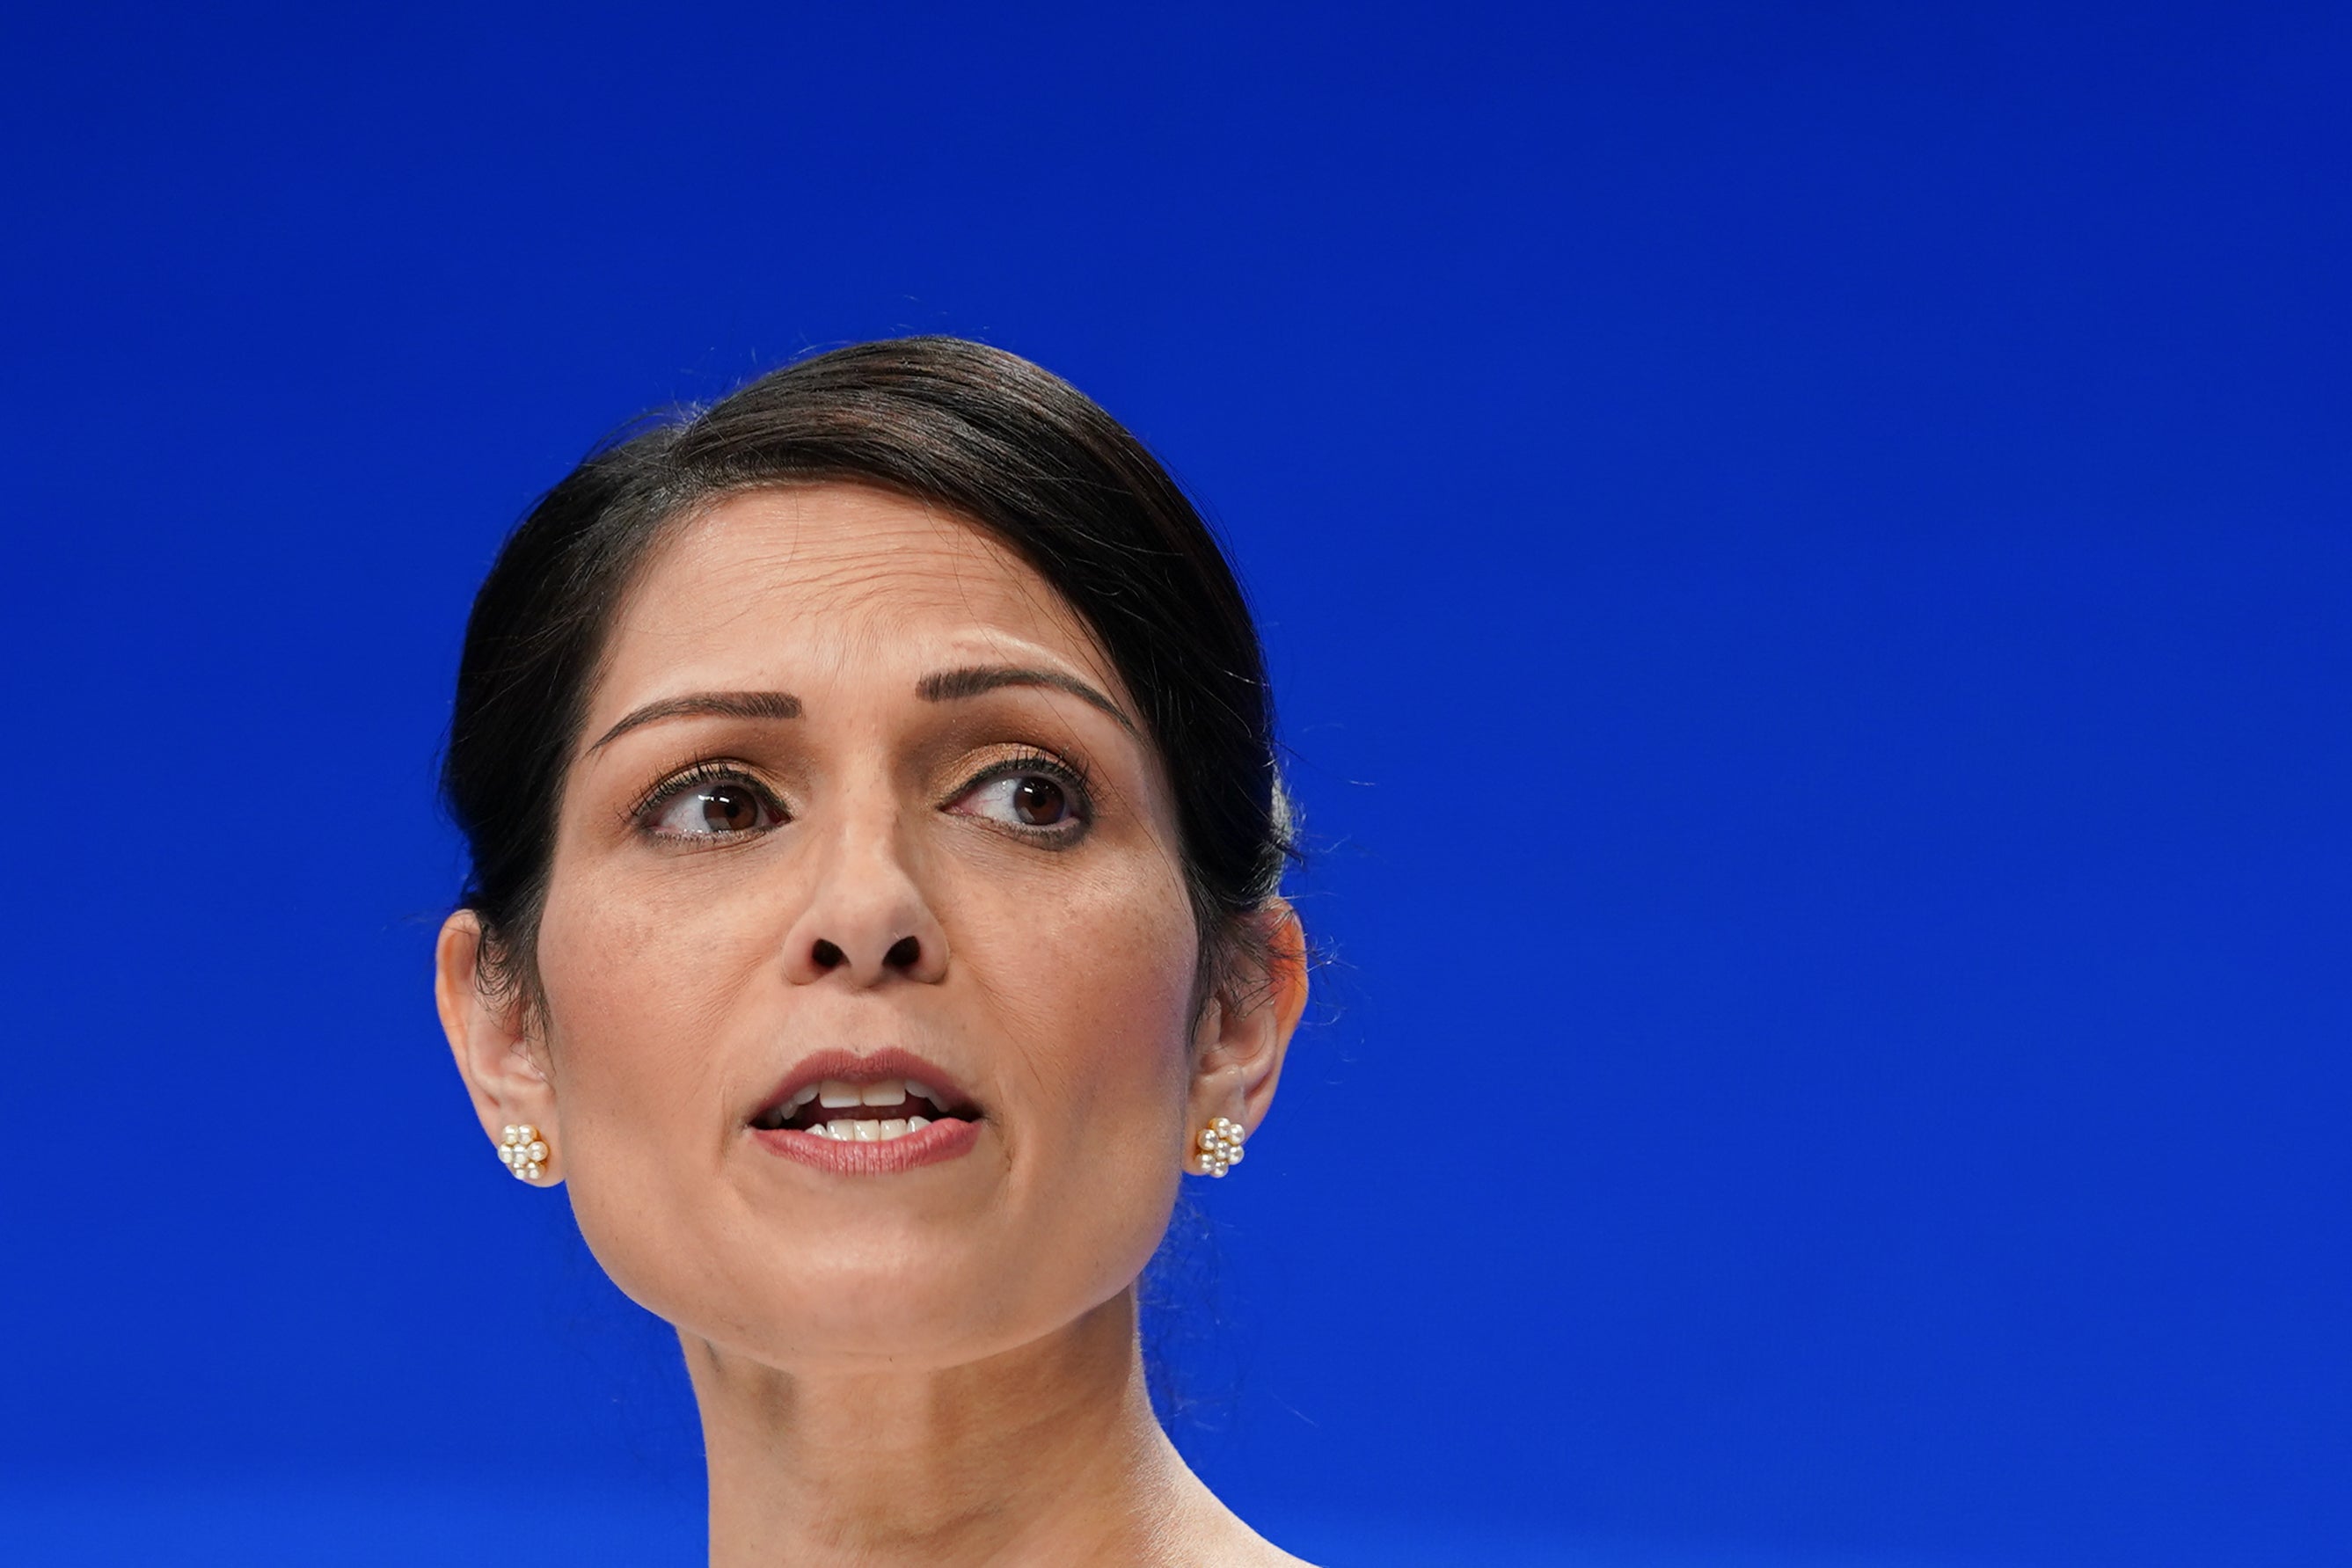 Priti Patel’s difficulty has been to find somewhere that would accept asylum-seekers, but now she has not only found somewhere, she has changed the policy